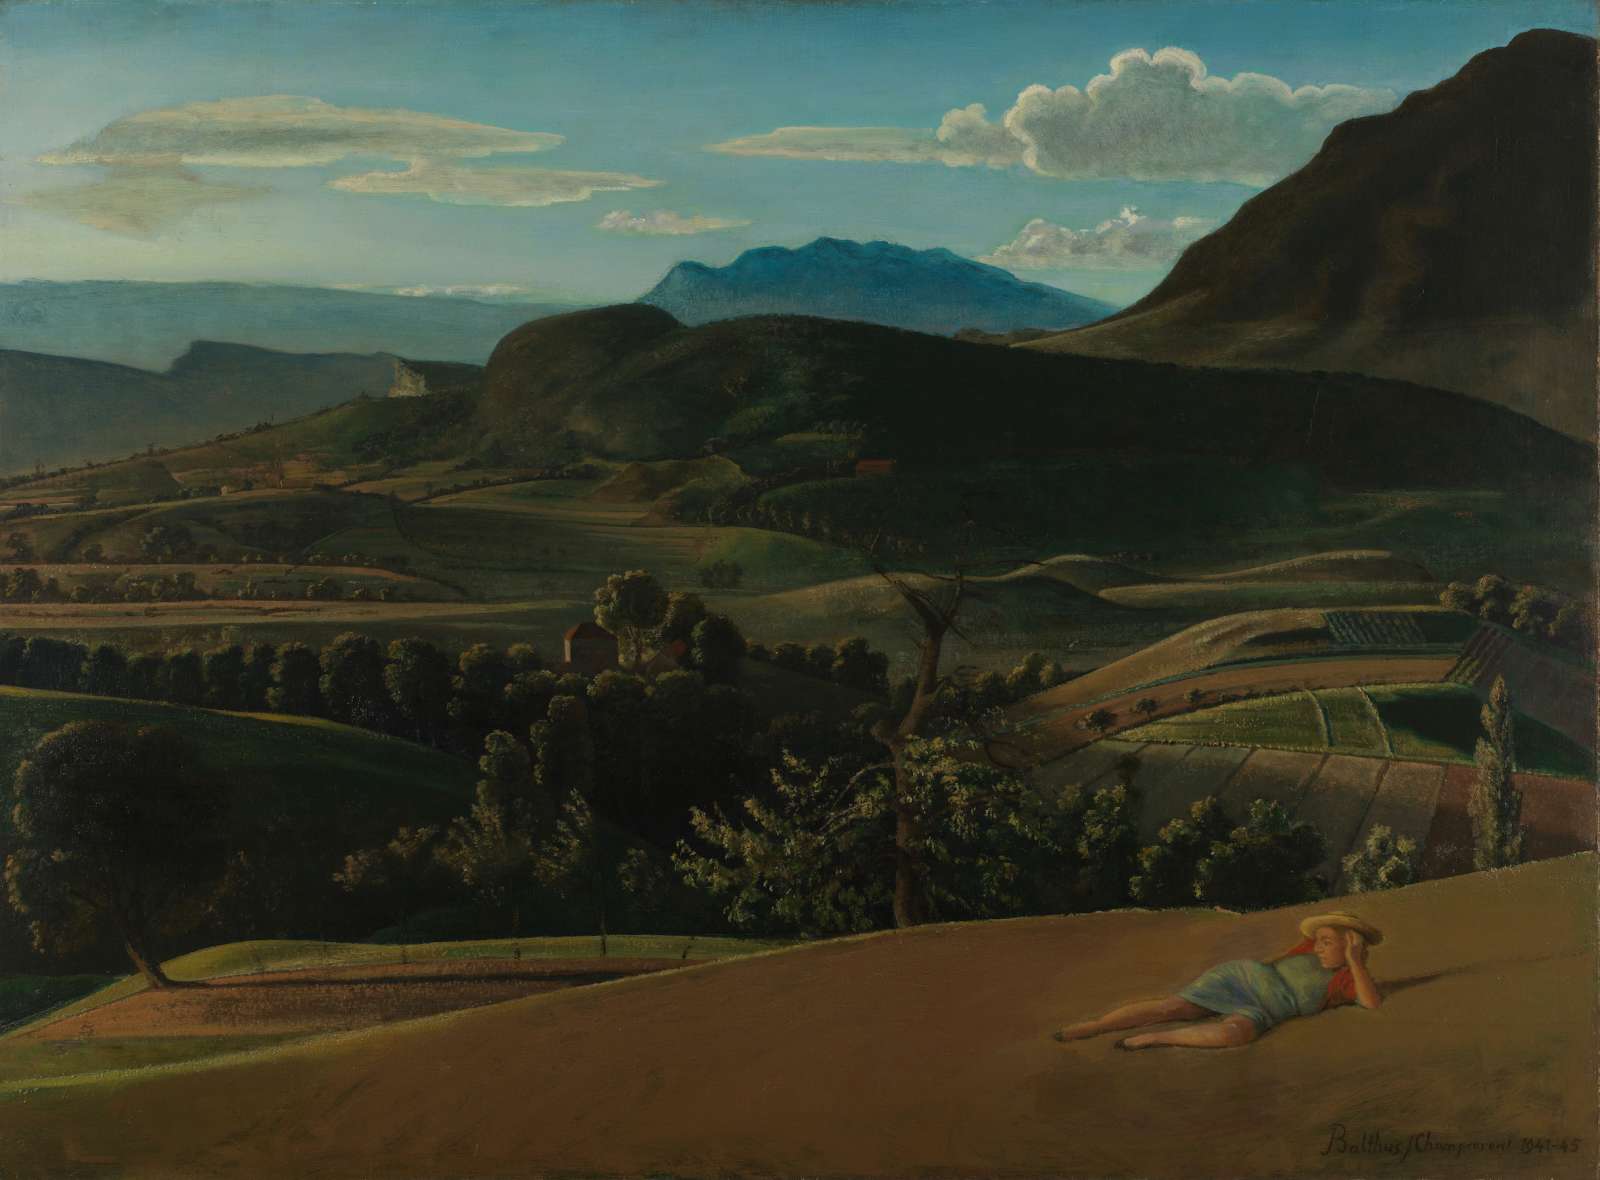 Balthus, 'Paysage de Champrovent', 1941-5. Oil on canvas, 37 3/4 x 51 1/8 in. (96 x 130 cm). Image: Private Collection, Courtesy of Luxembourg + Co., © ADAGP, Paris and DACS, London 2023.